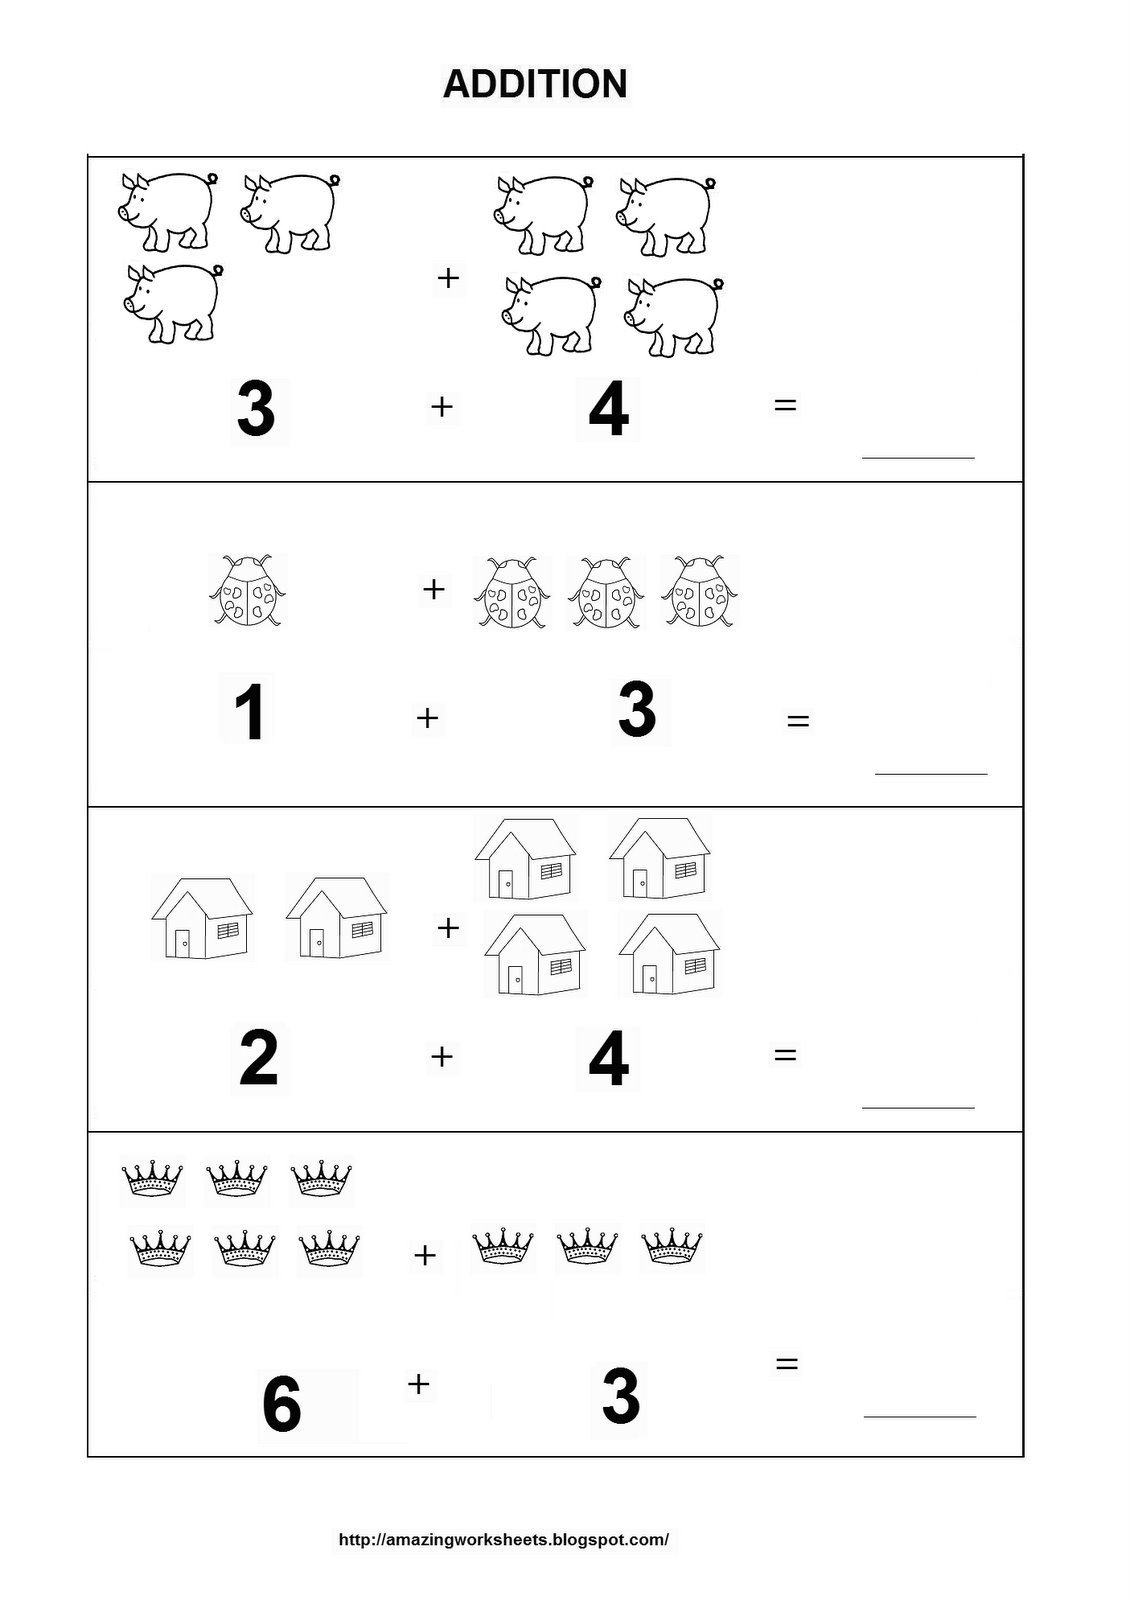 14 Best Images of Adding Objects Worksheets - Adding One ...